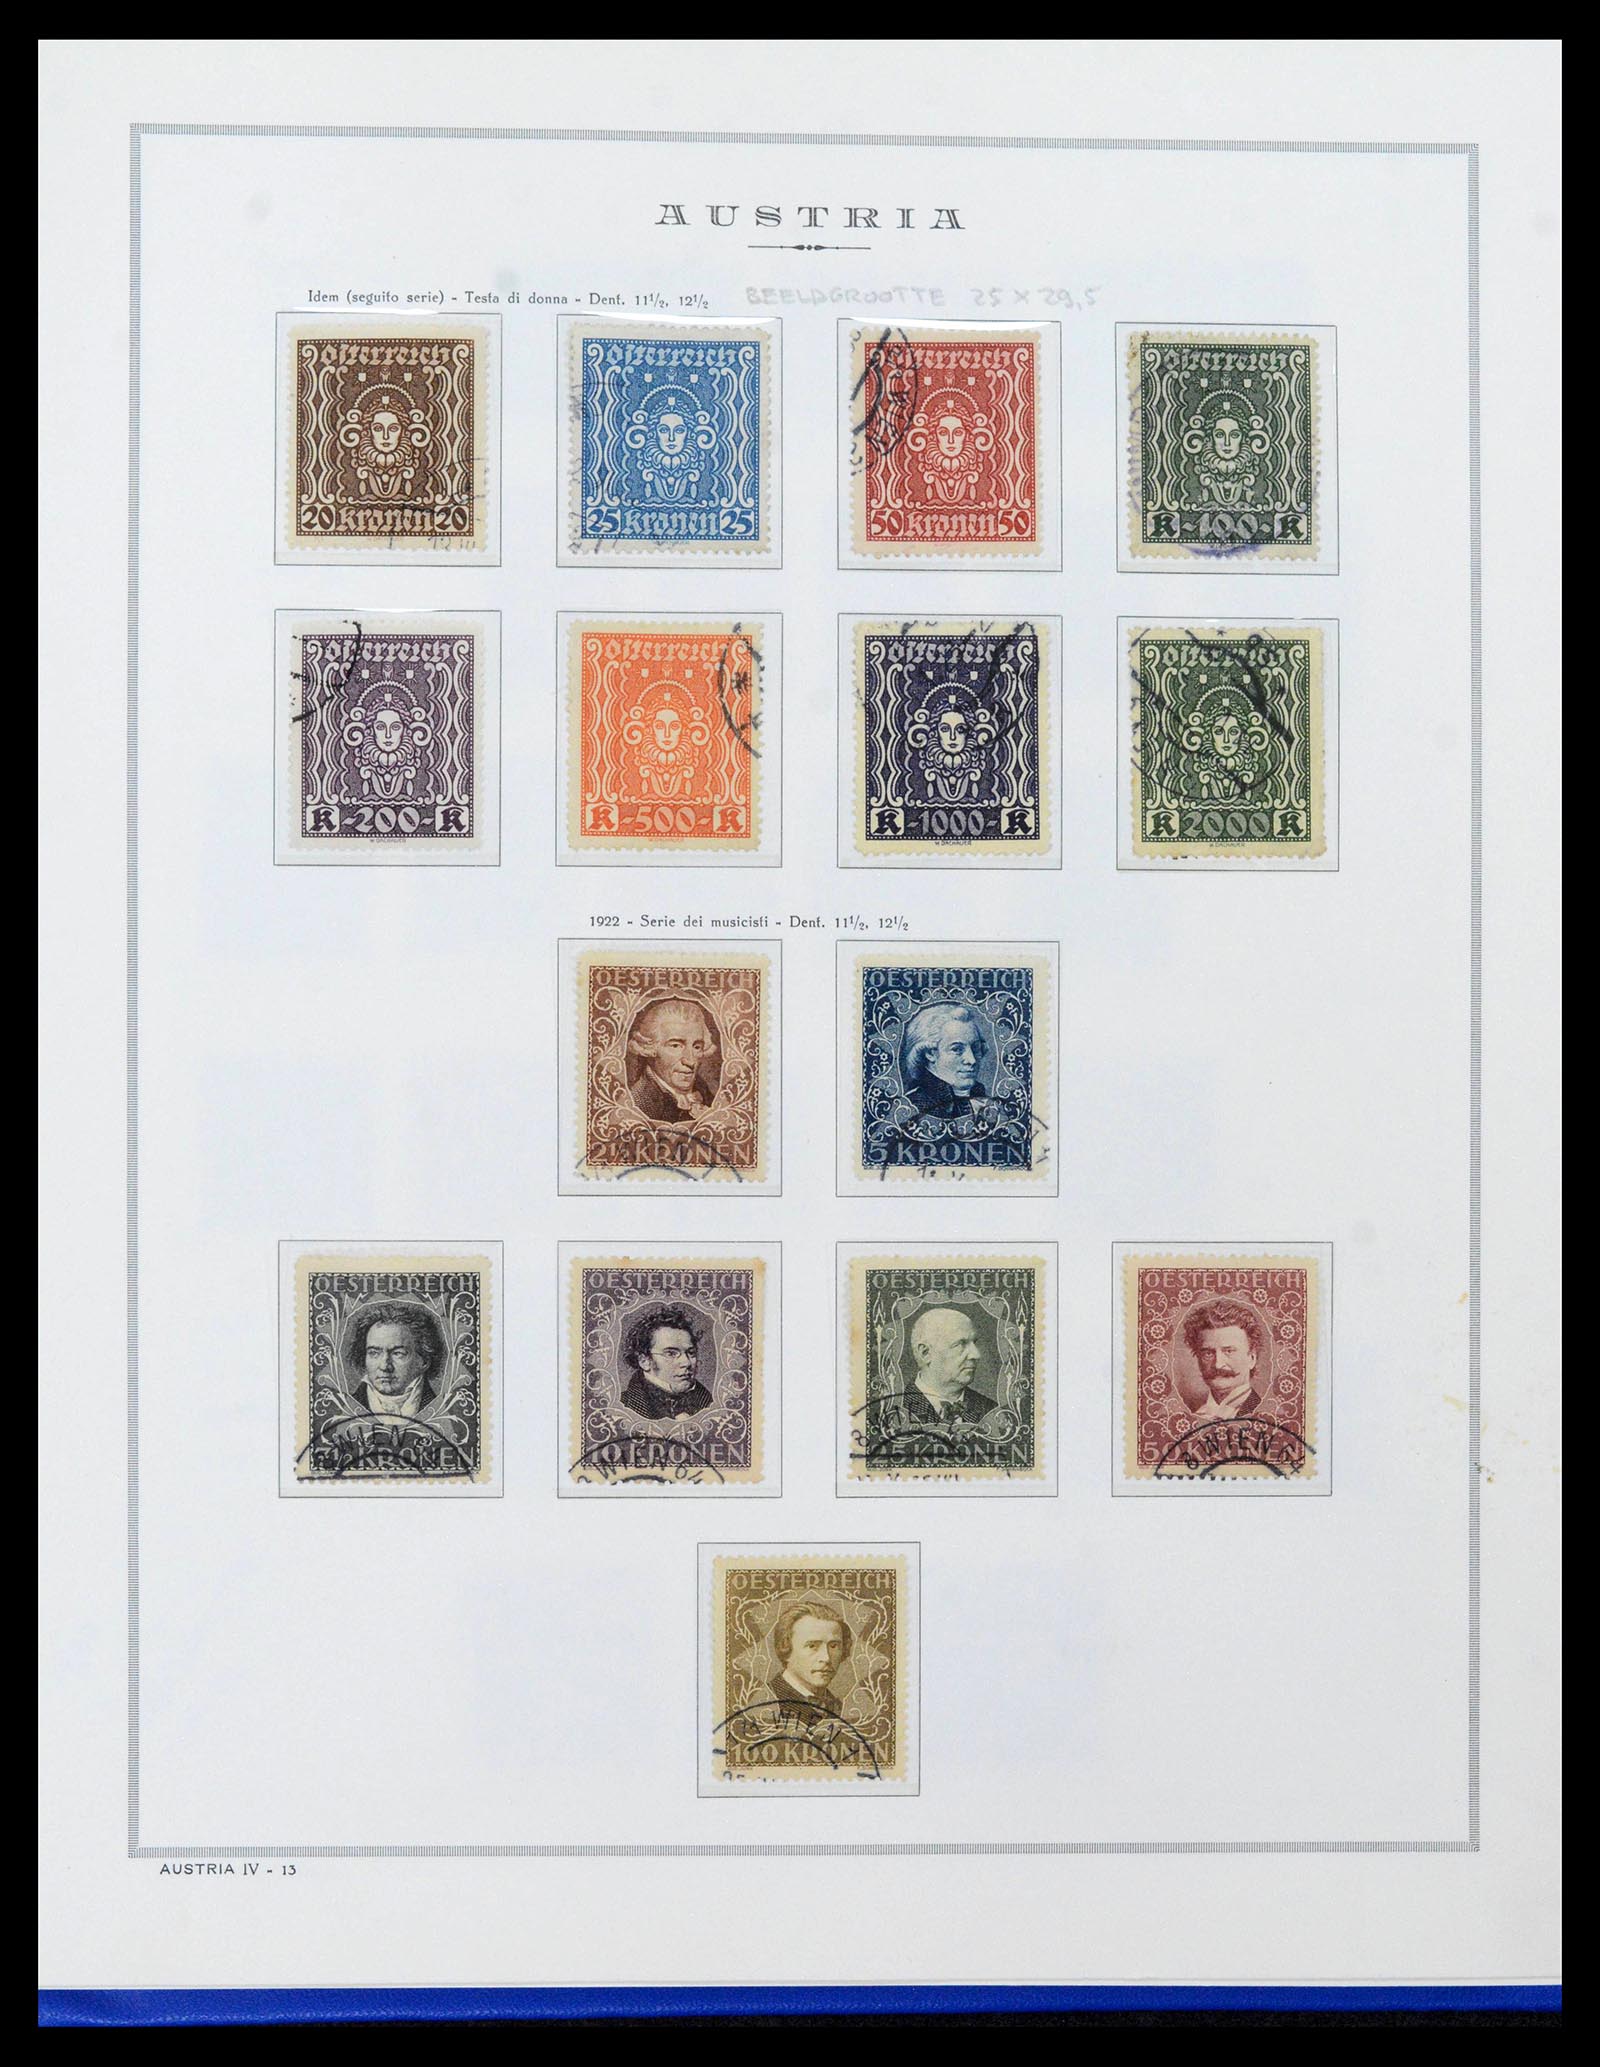 39038 0025 - Stamp collection 39038 Austria 1850-1950.